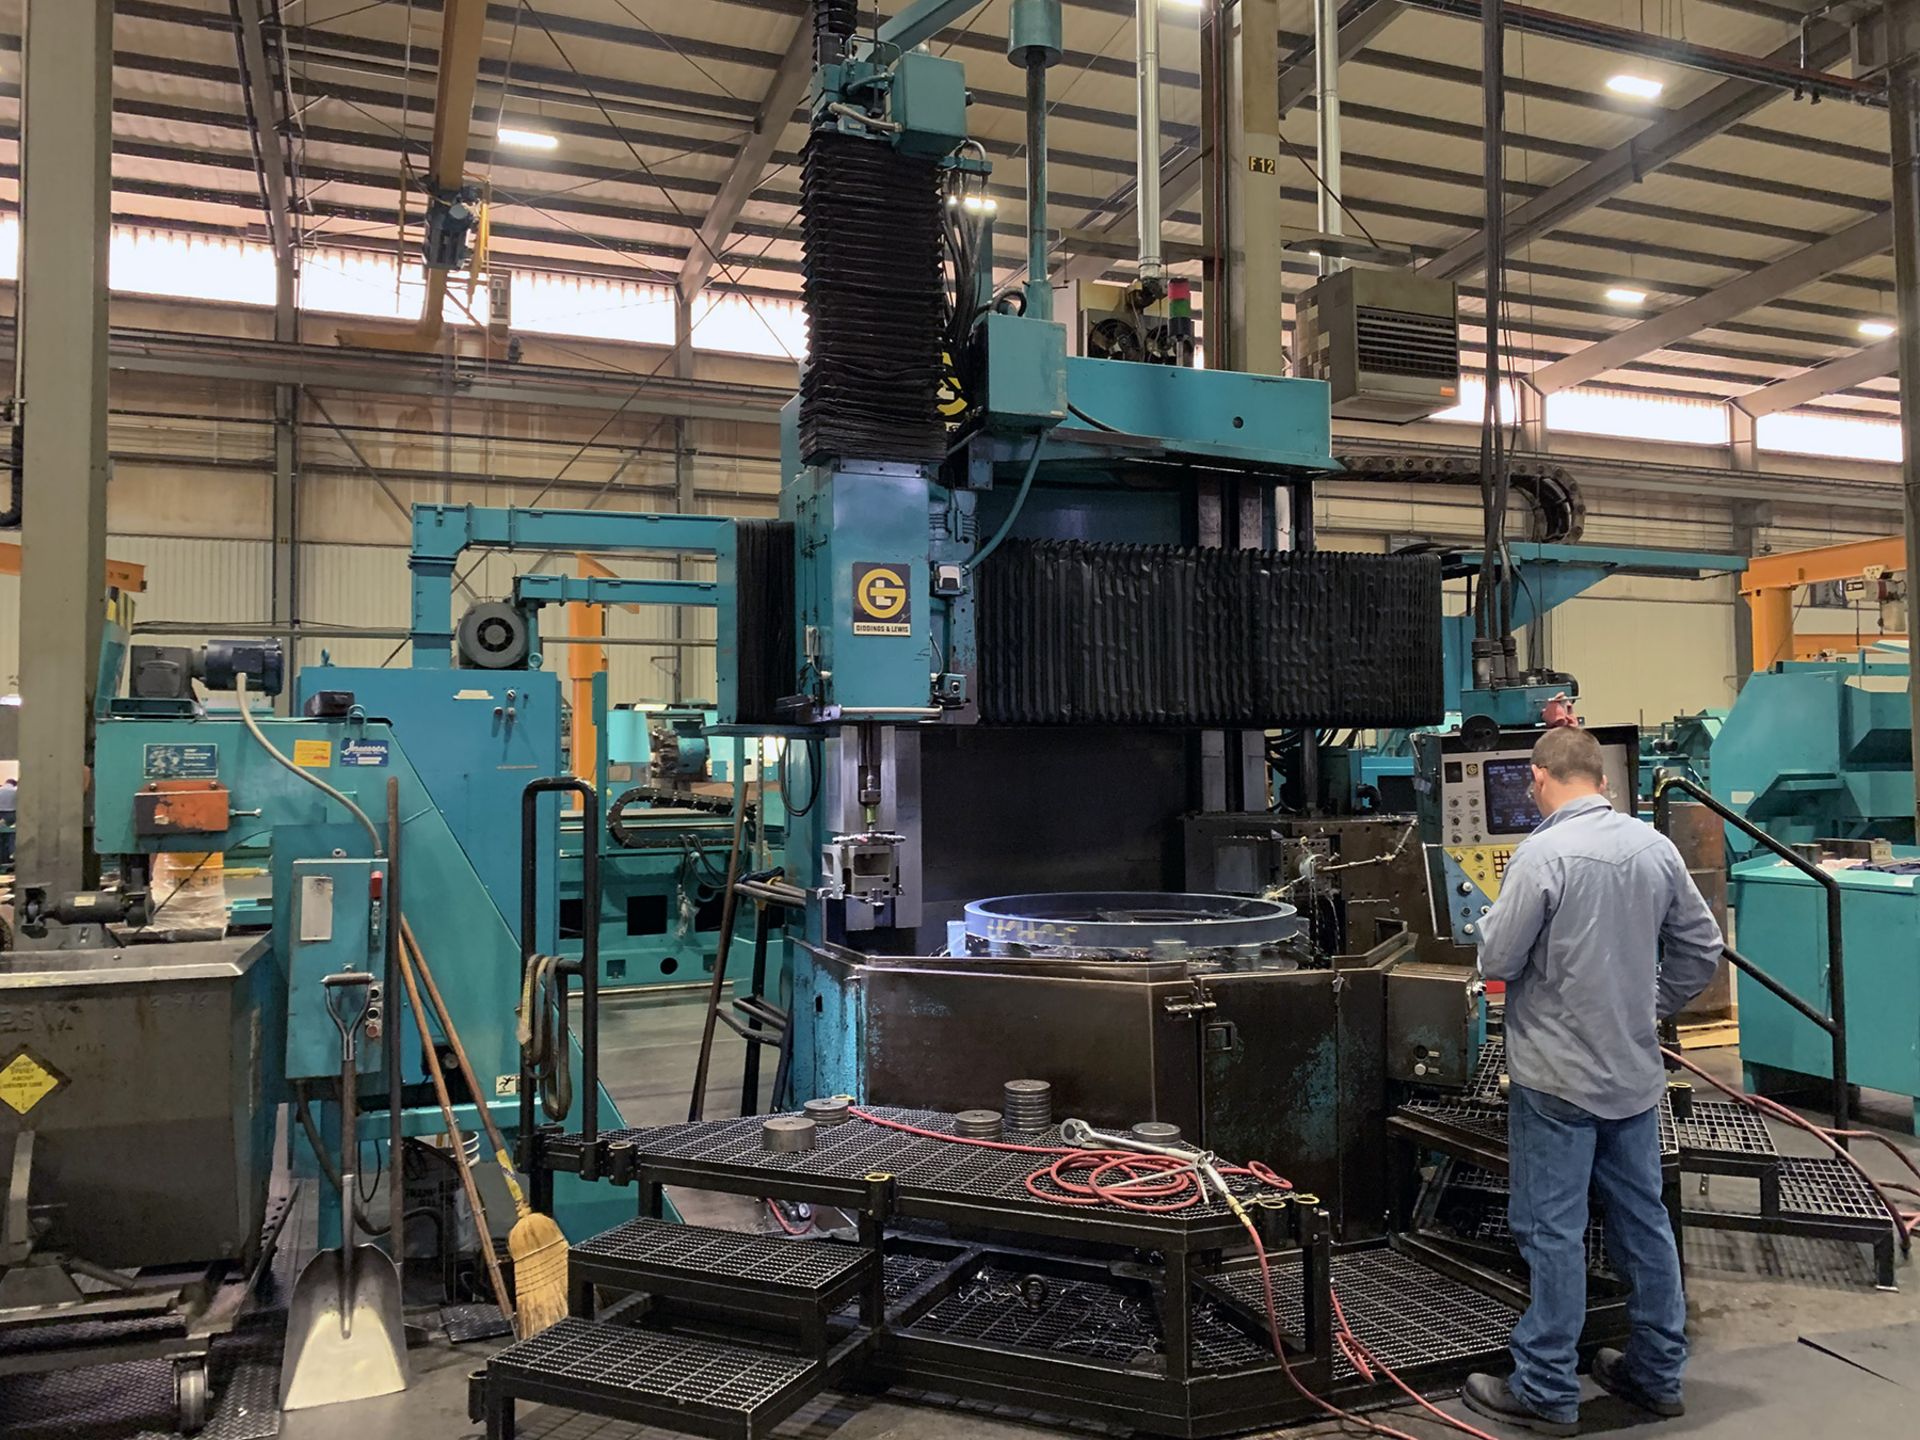 48" Giddings & Lewis CNC Vertical Boring Mill, new 1984, 48" table dia., 4-jaw chuck, 60" swing, 12"